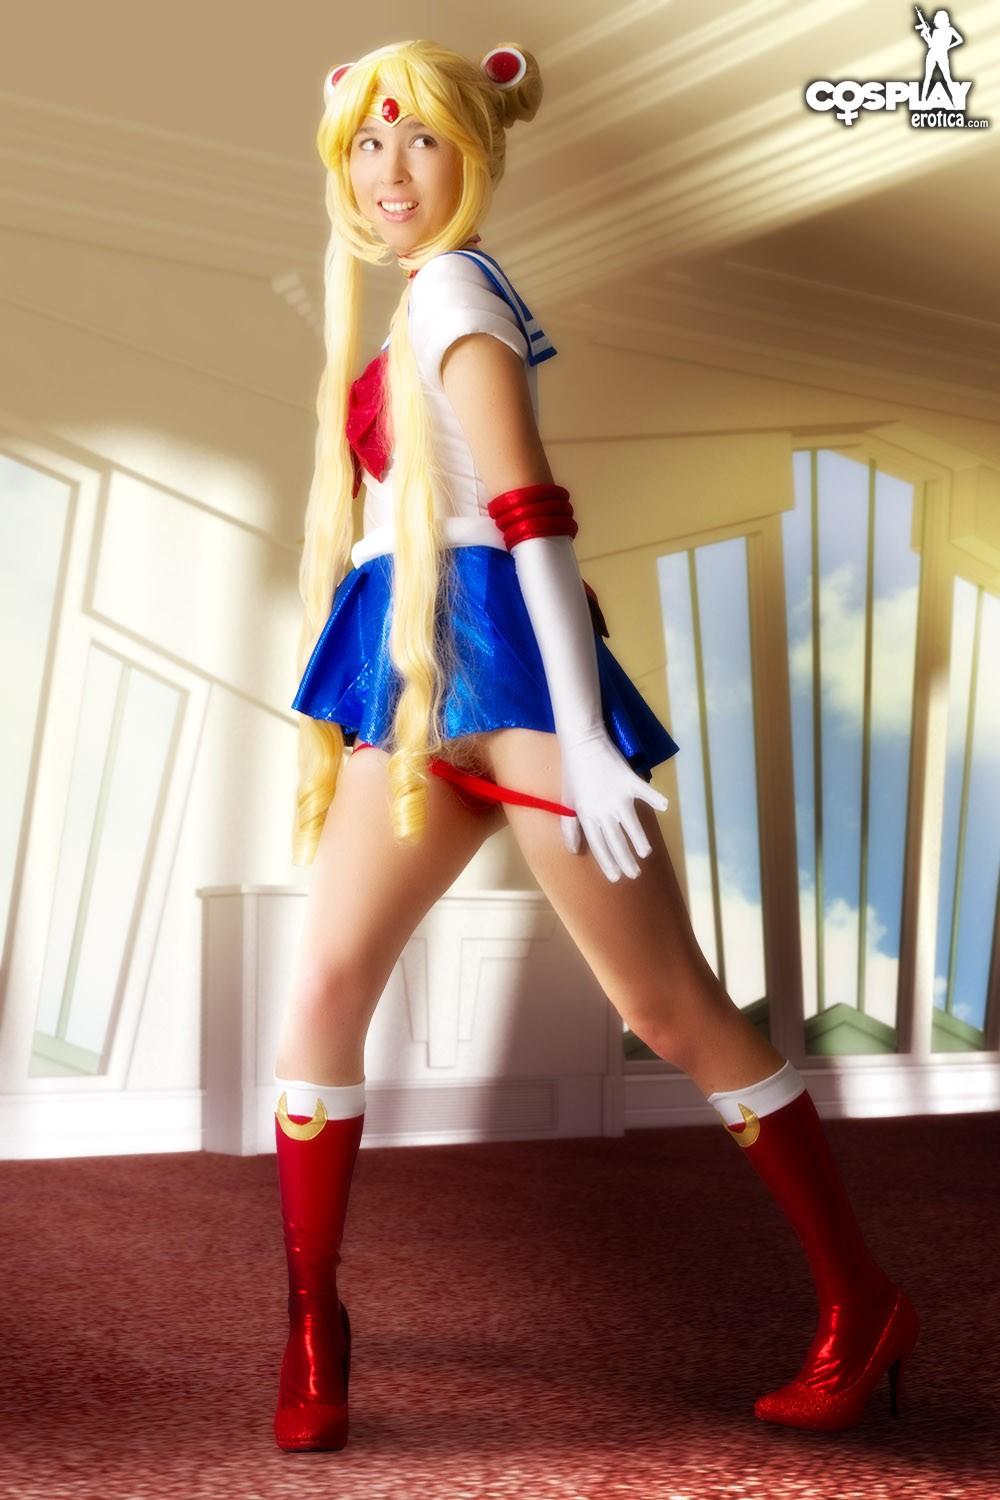 Cosplay girl Stacy is fighting evil by moonlight #60007713